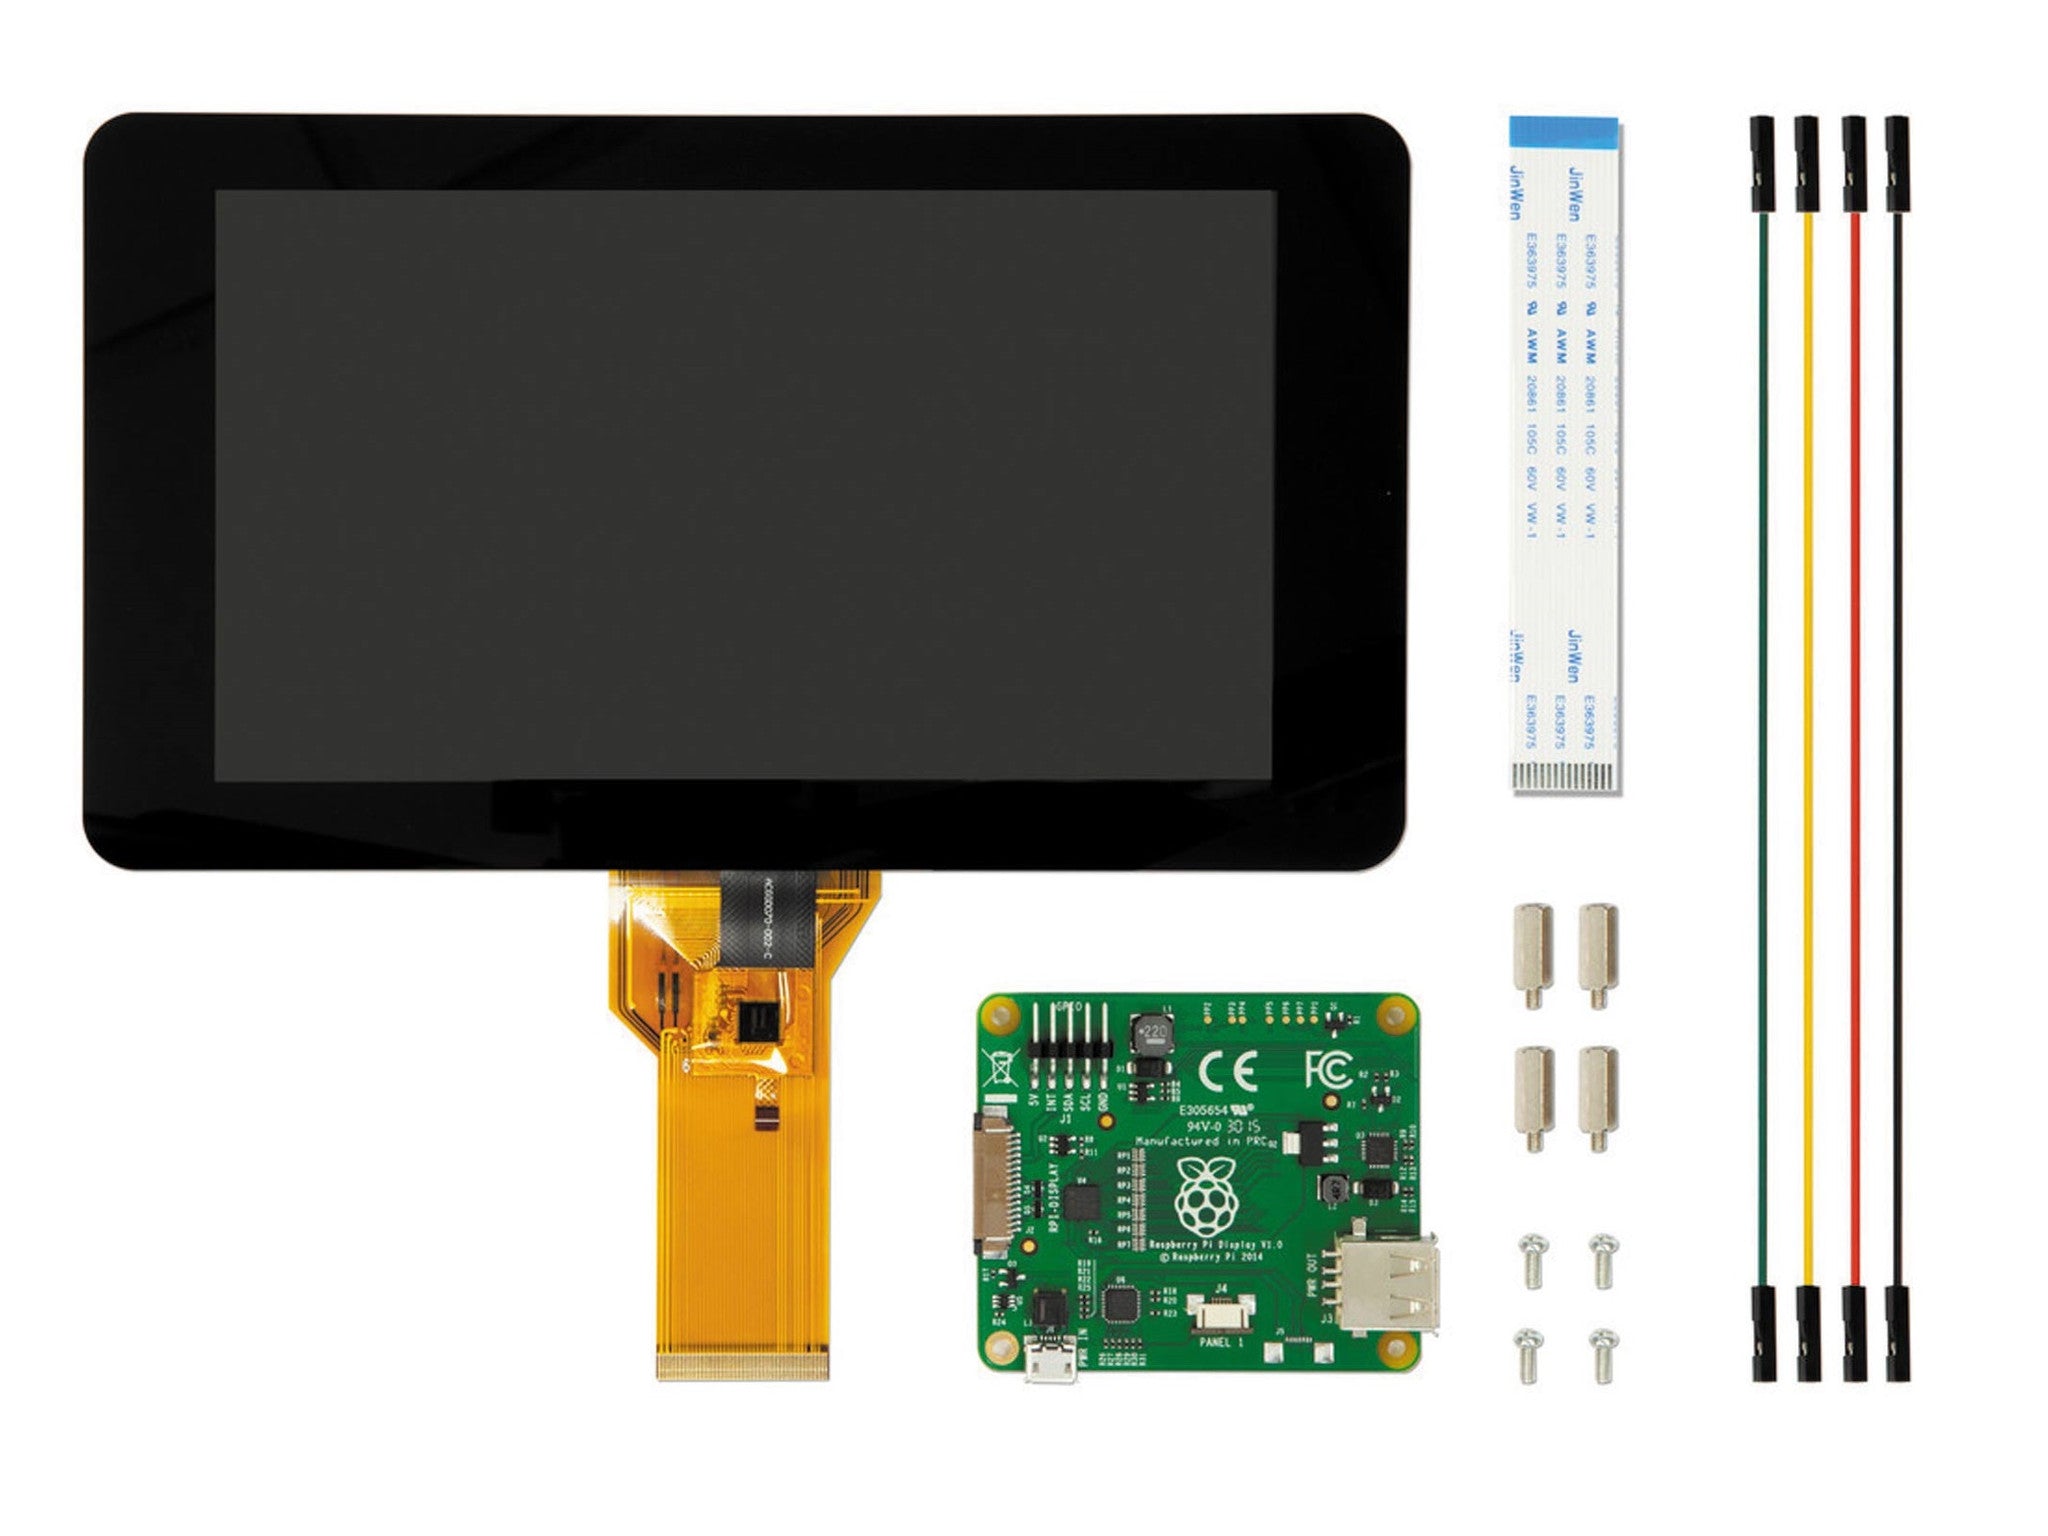 Raspberry Raspberry Pi Official 7" Capacitive Touch Screen Display - BNR Industrial